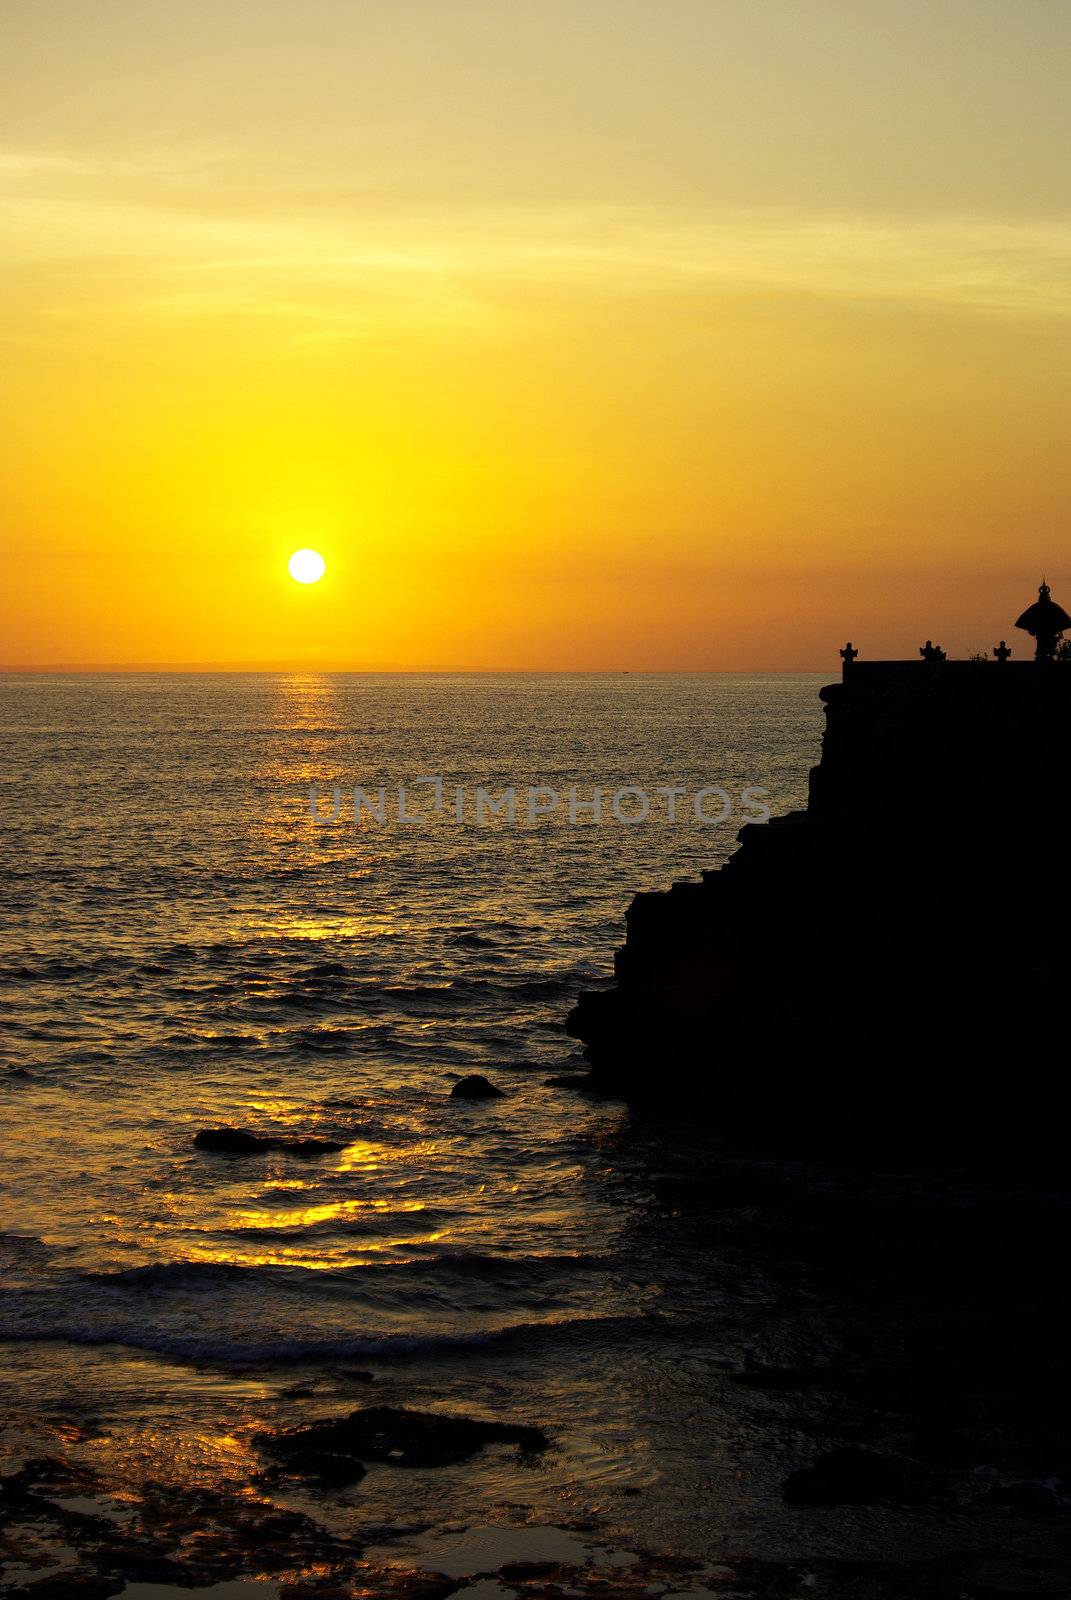 It's a beautiful sunset on Bali island with a little temple in the shadows